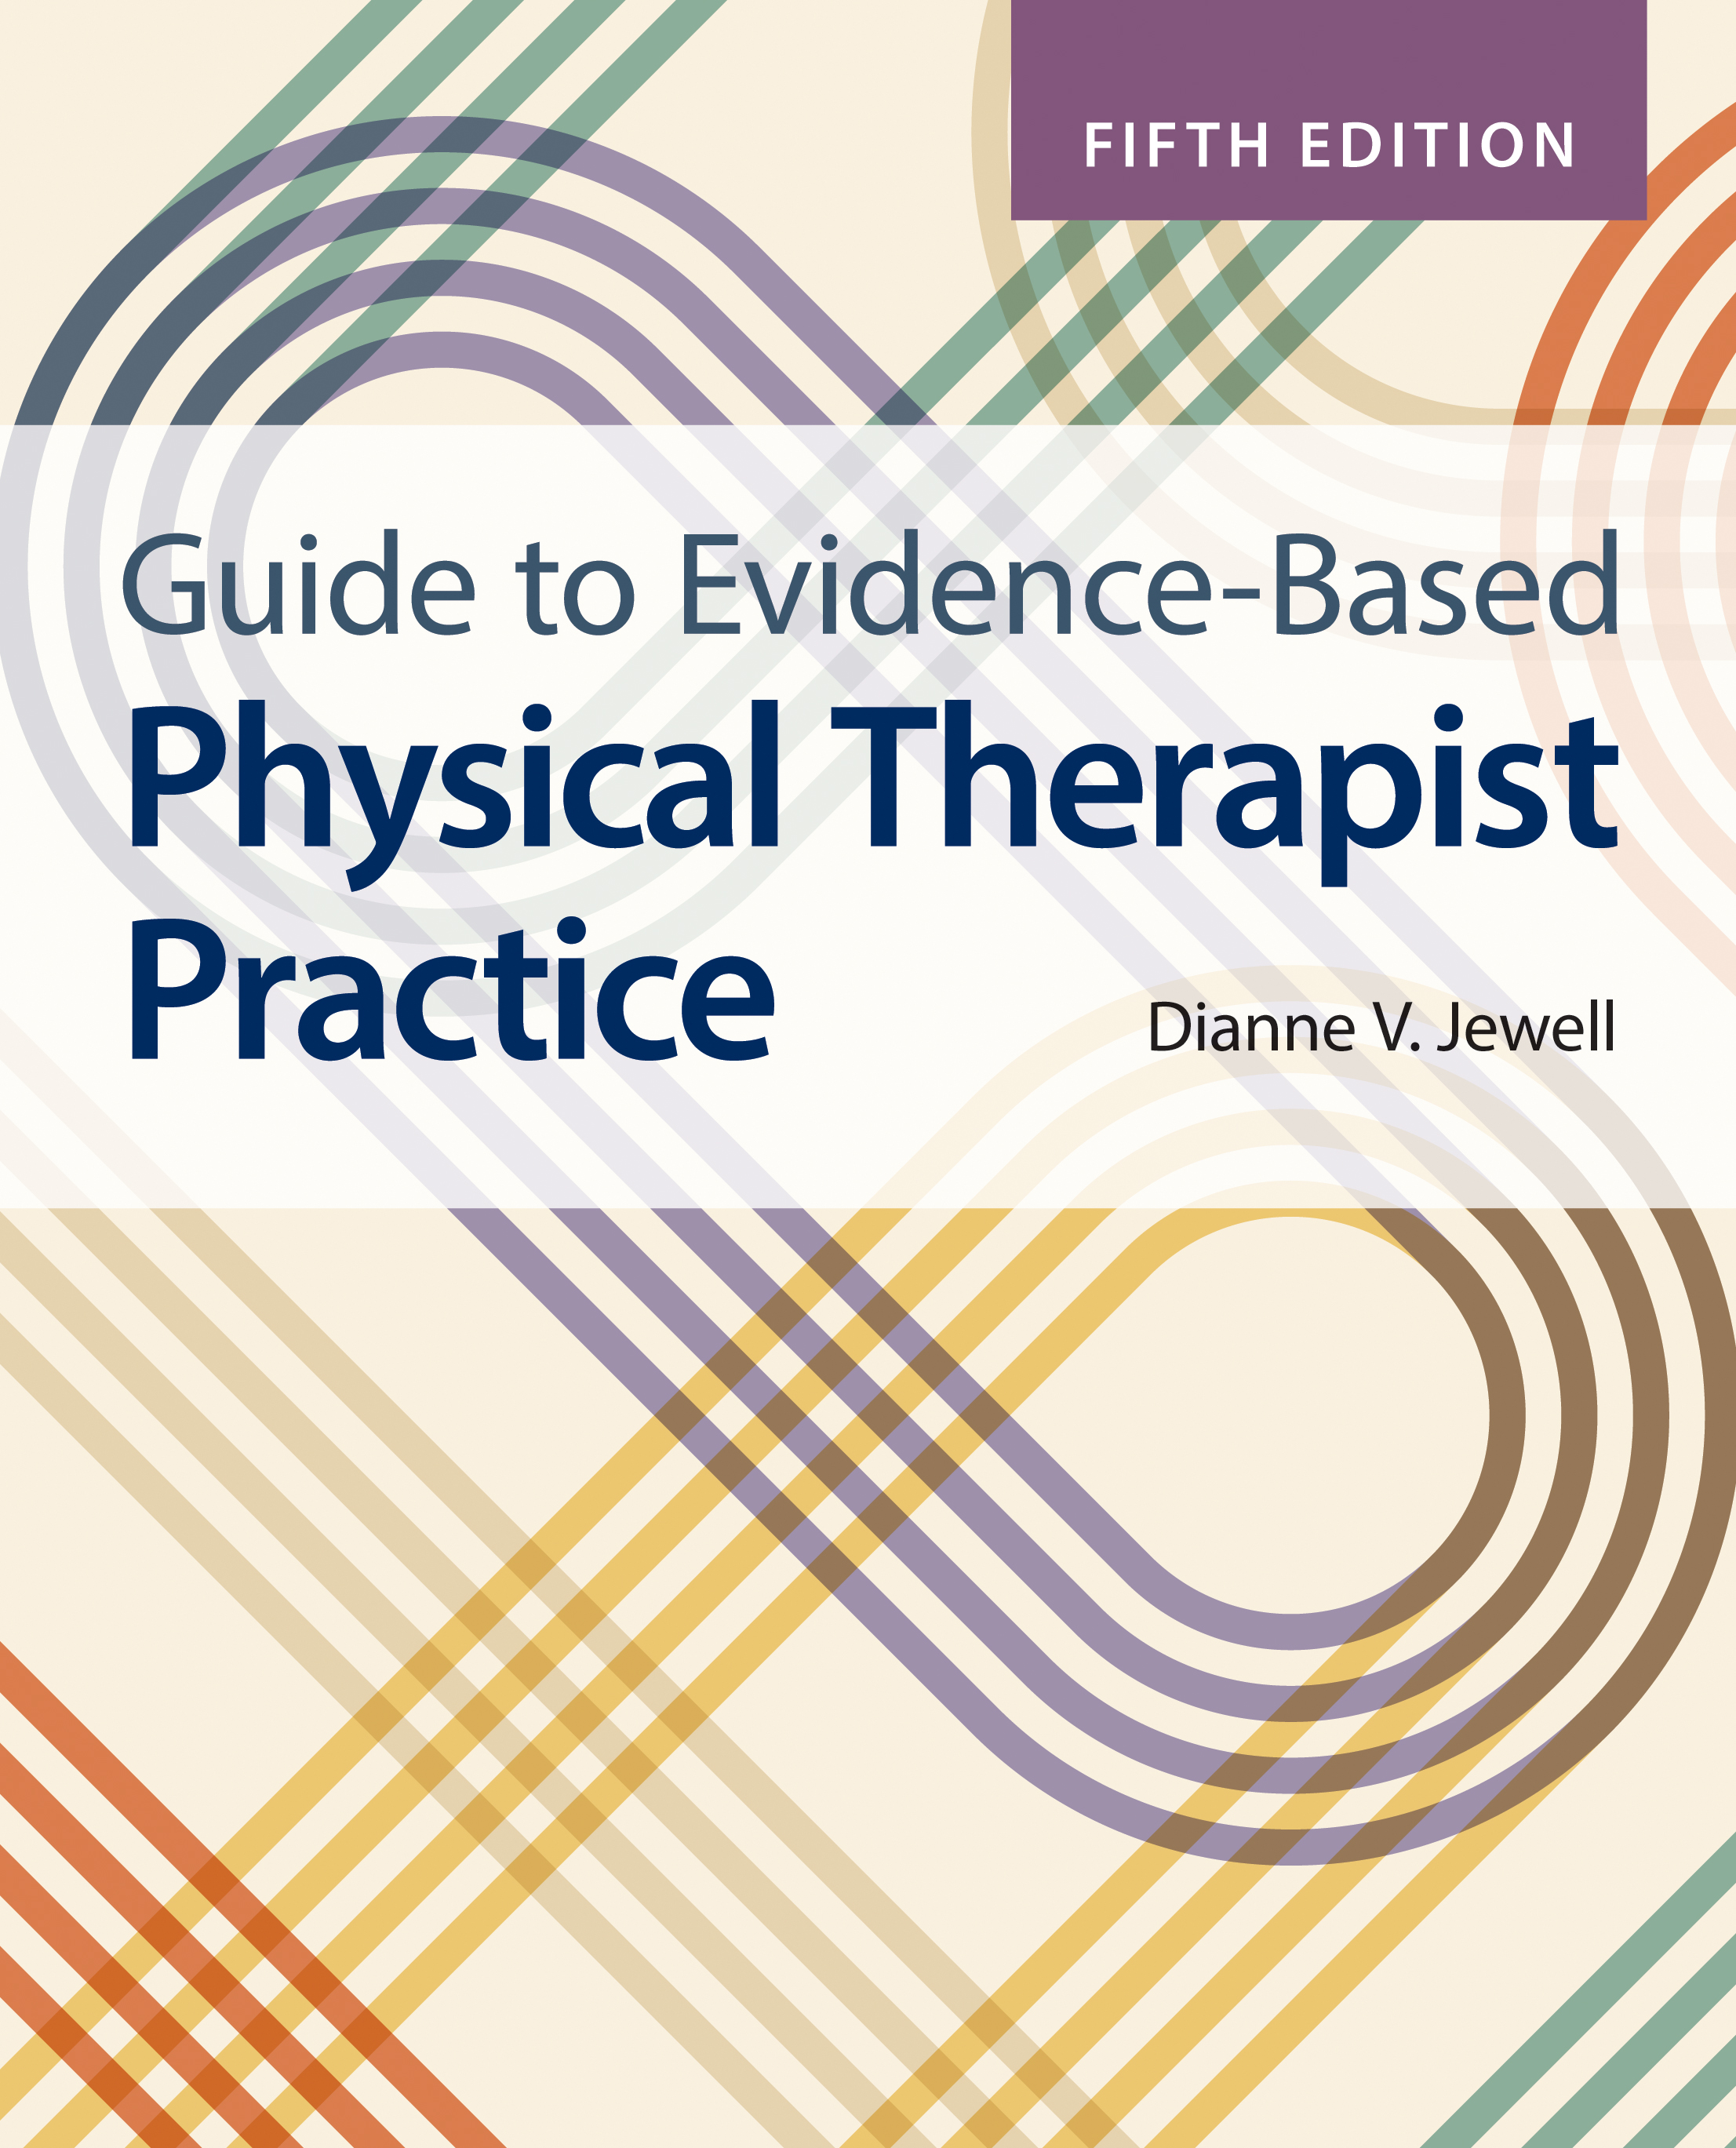 Guide to Evidence-Based Physical Therapist Practice - image 1